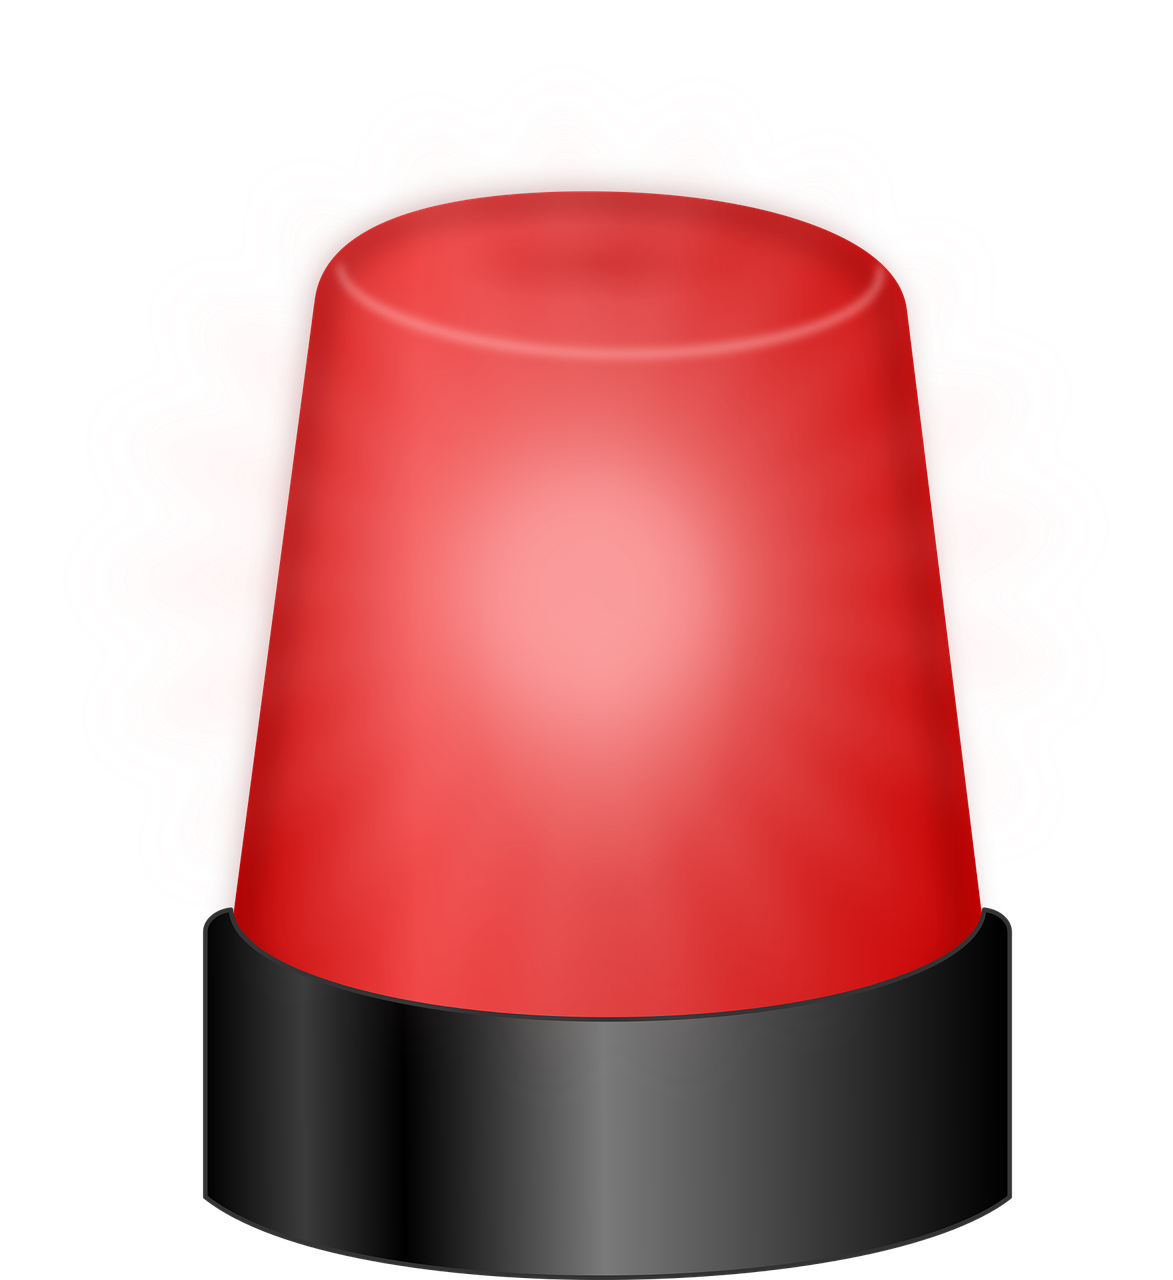 a red hat sitting on top of a table, a digital rendering, digital art, paranormal flashlight, lonely!! stop light glowing, clipart, police lights